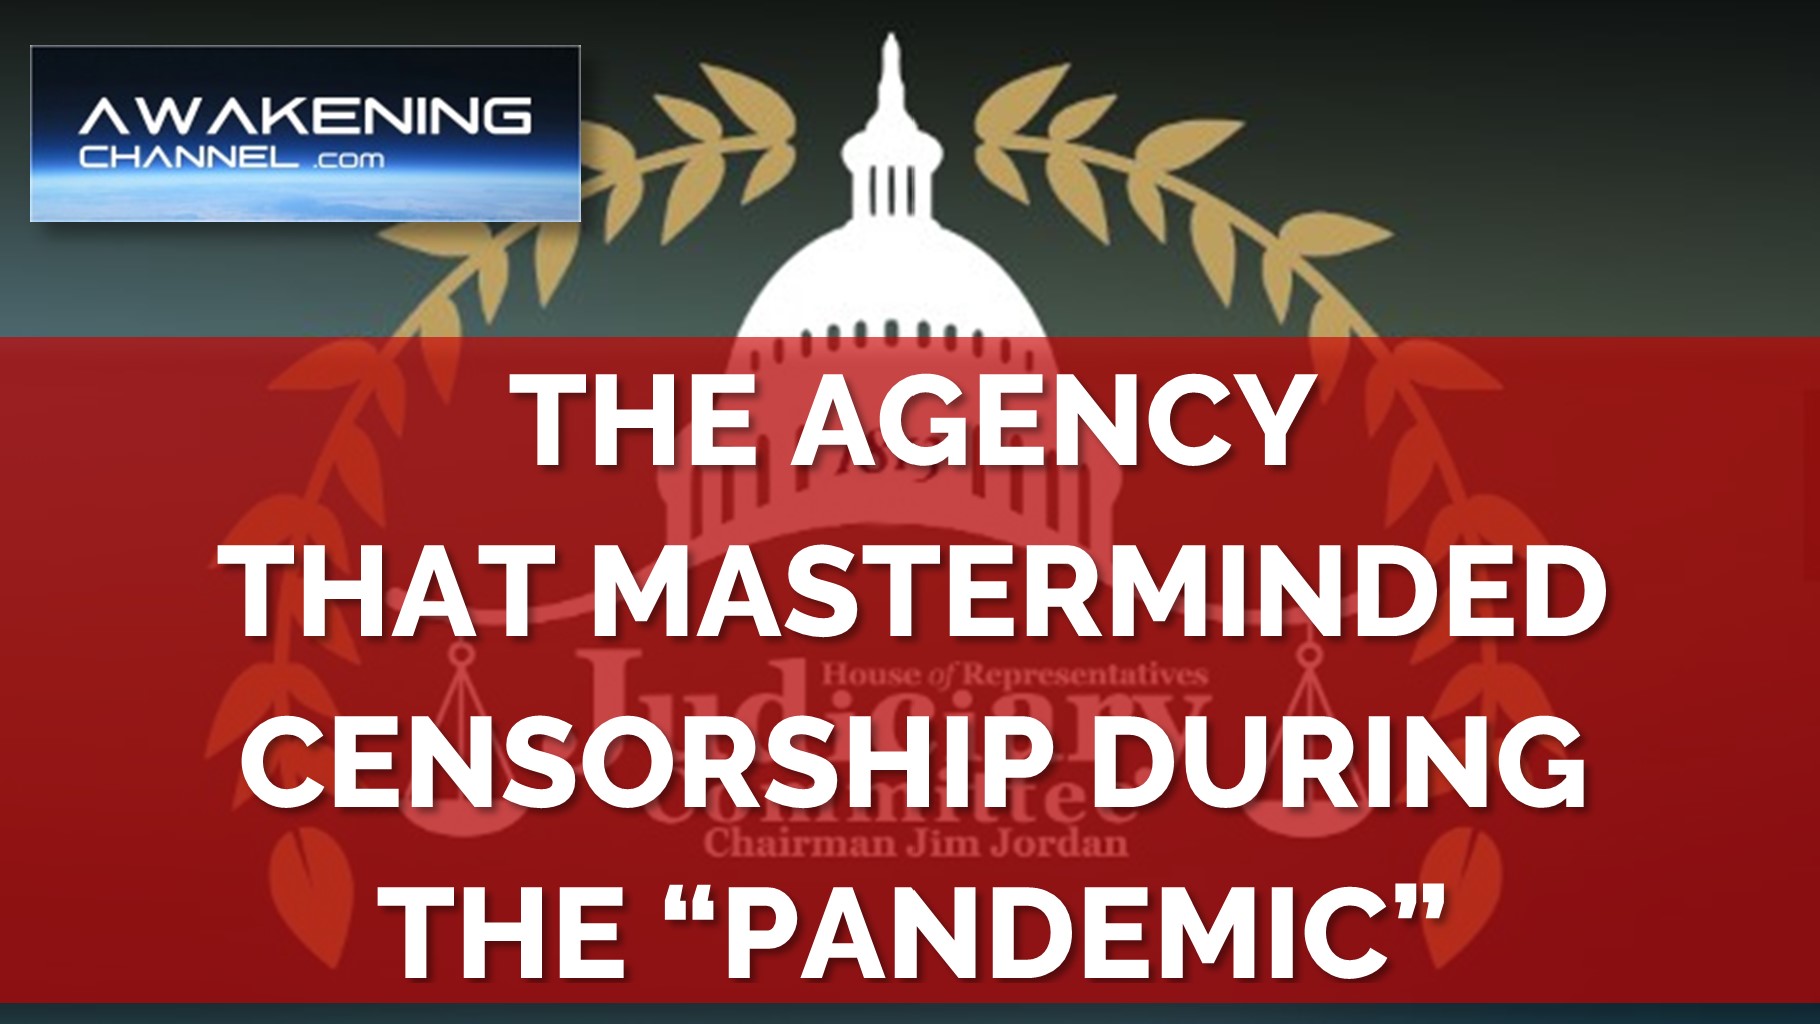 EXPOSED! Agency Under Homeland Security Masterminded the Censorship During the”Pandemic”